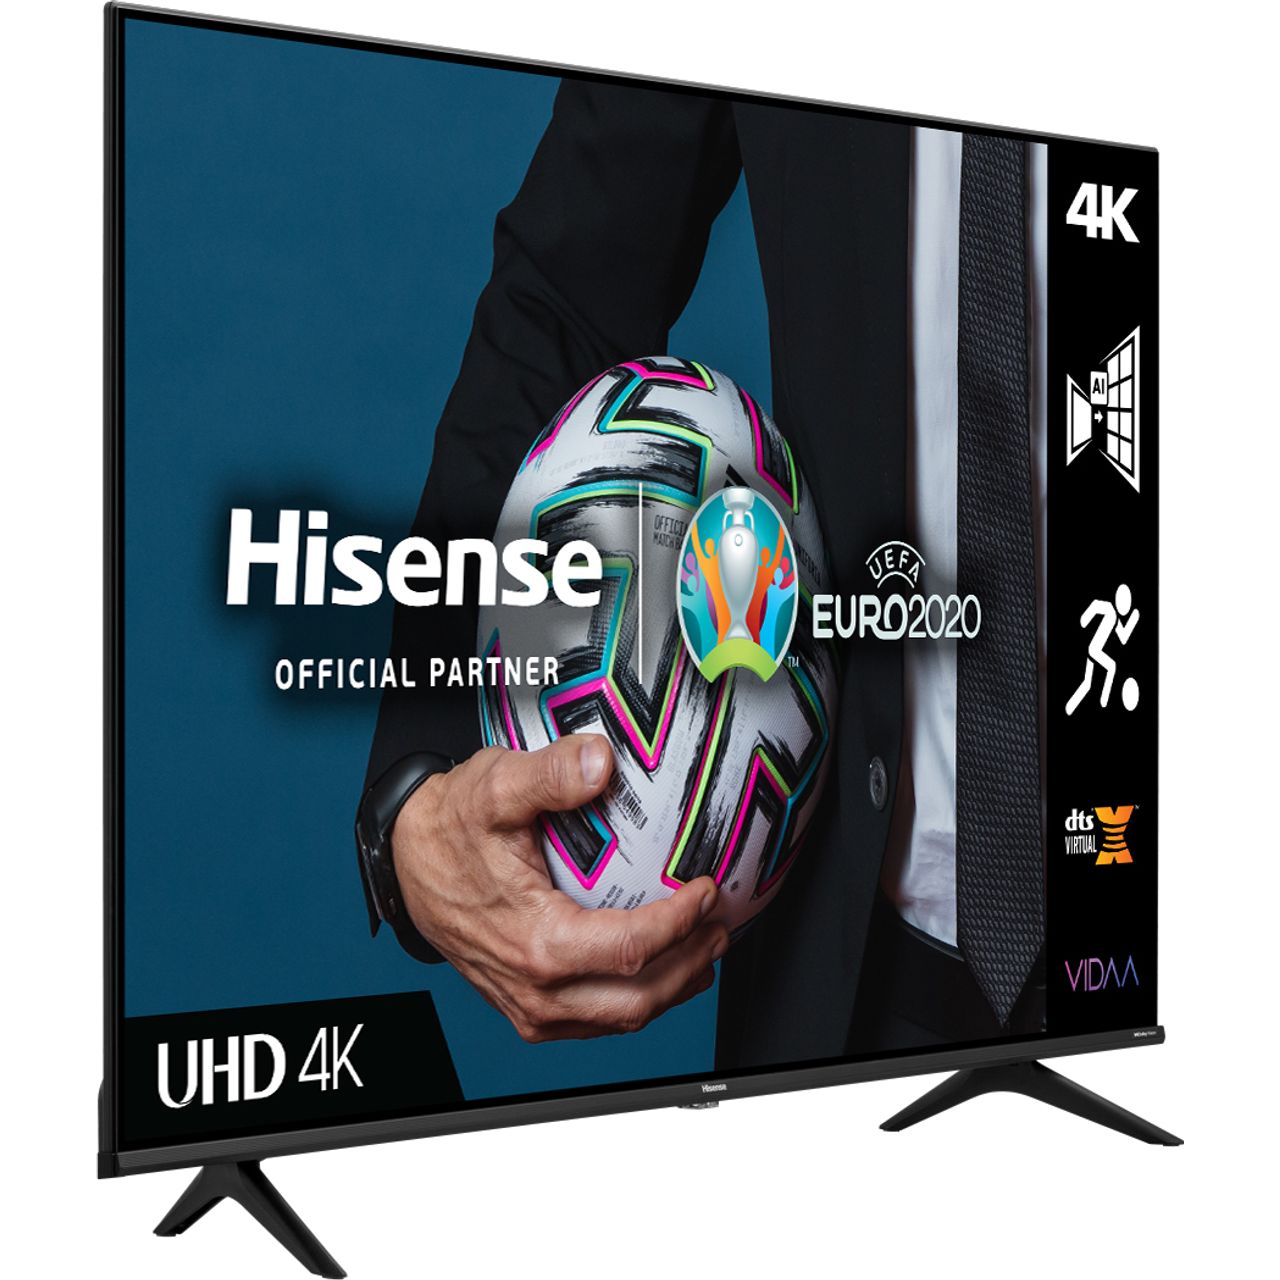 This 65a6gtuk 4k Ultra Hd Hisense Tv Comes With Dts Virtual X Sound Hdr Technology And Is Compatible With Both Alexa And Google Assistant